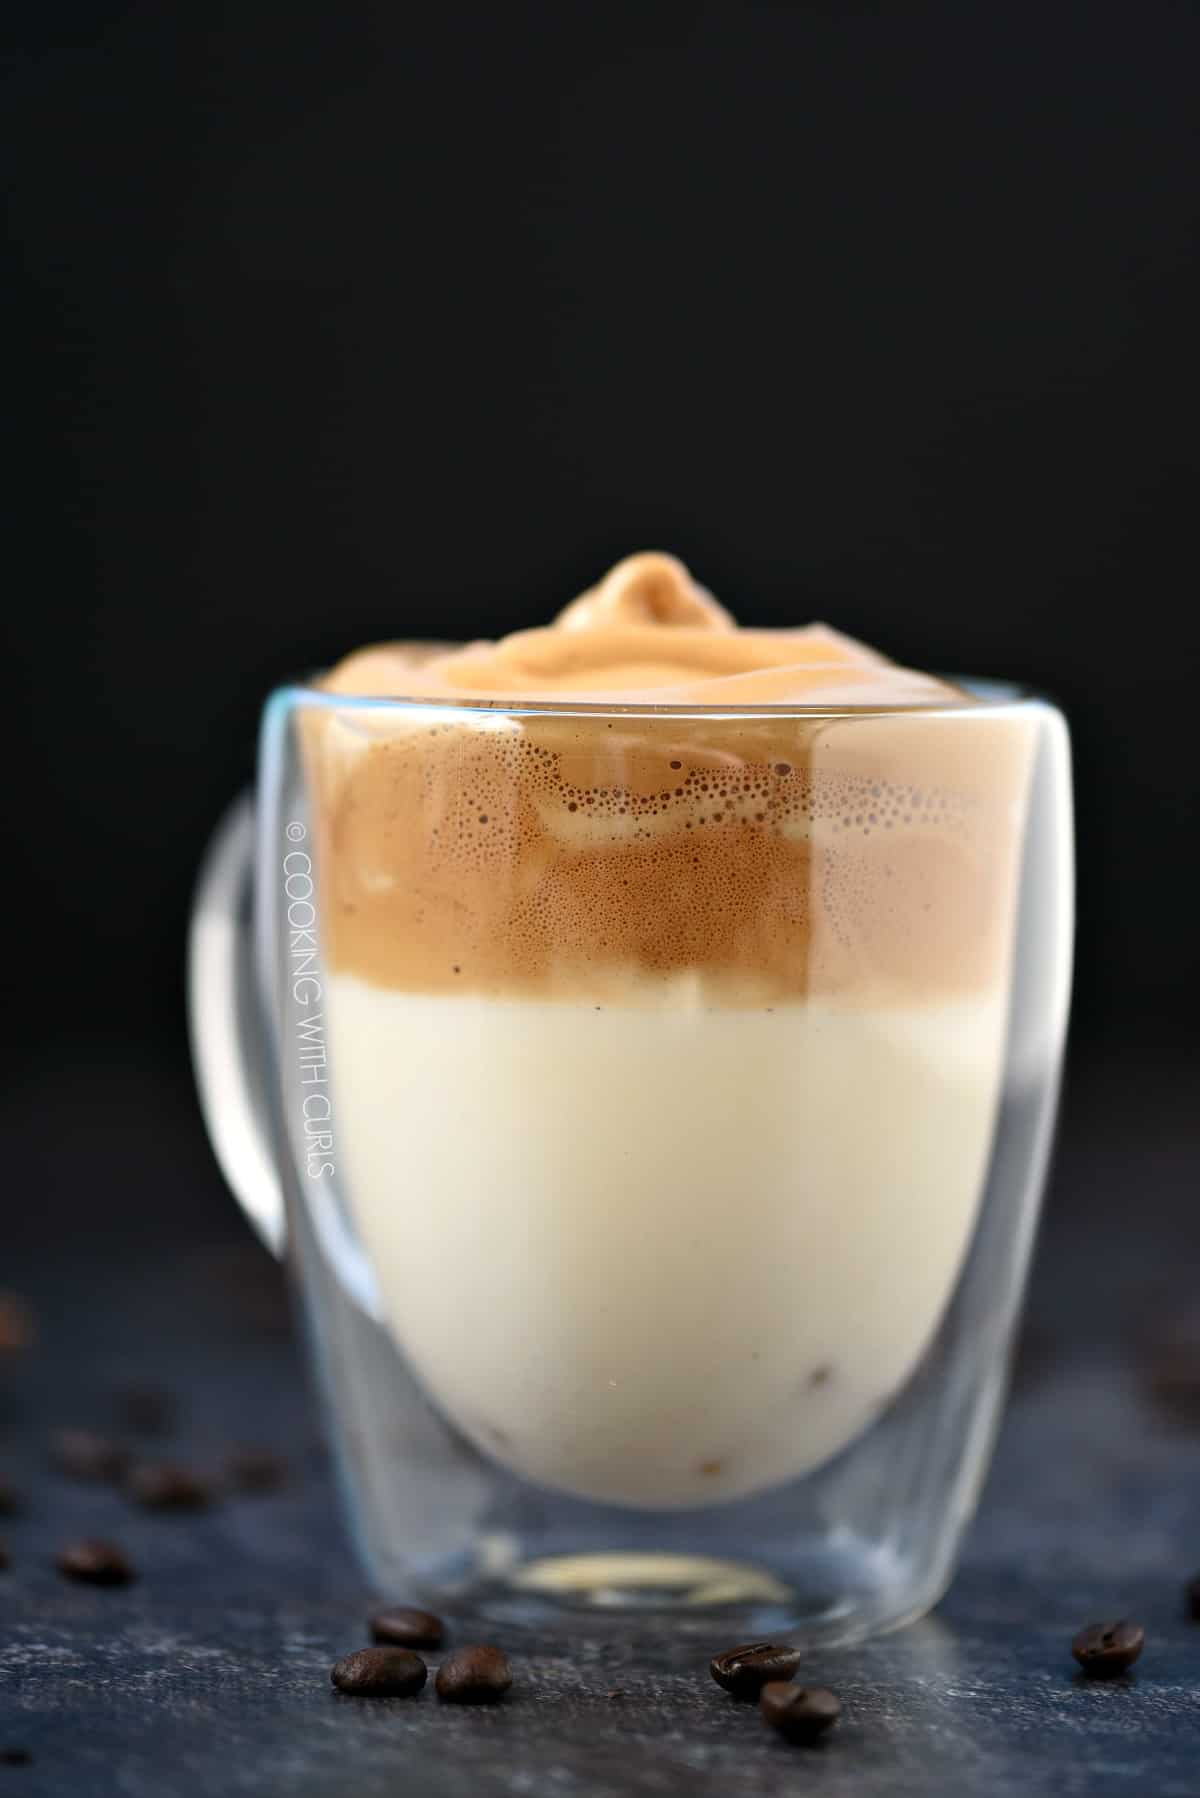 Side view of whipped dalgona coffee floating on top of milk in a clear glass mug.